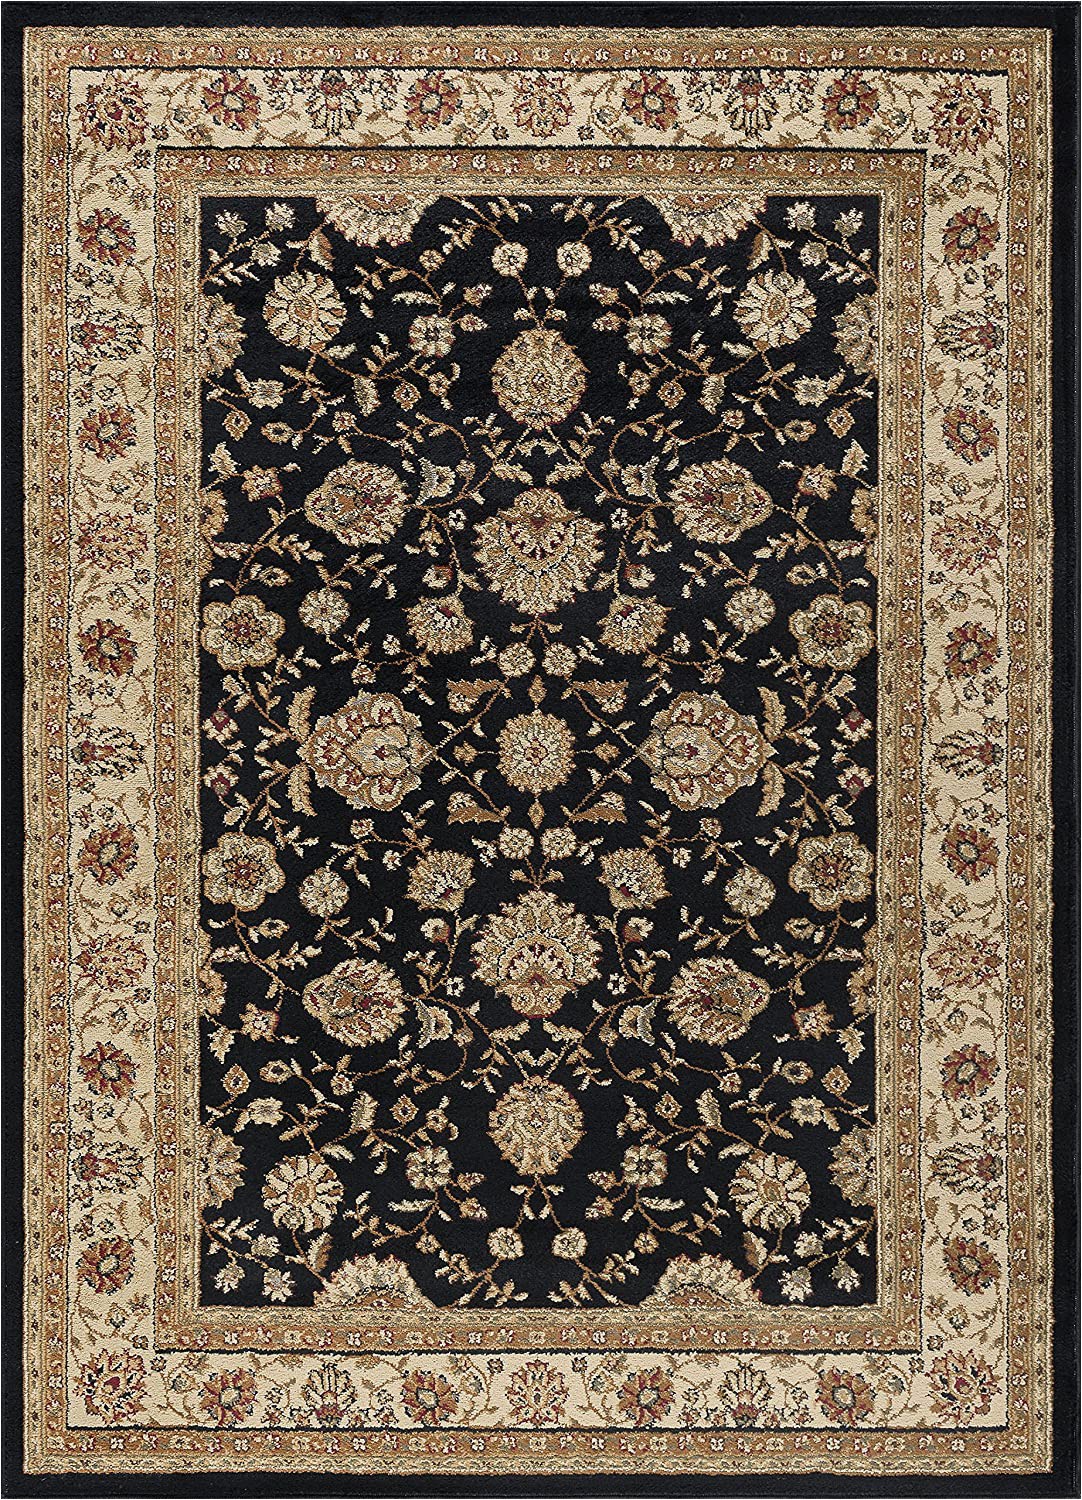 5ft by 7ft area Rug Buy Universal Rugs Traditional Floral 5 Ft X 7 Ft area Rug